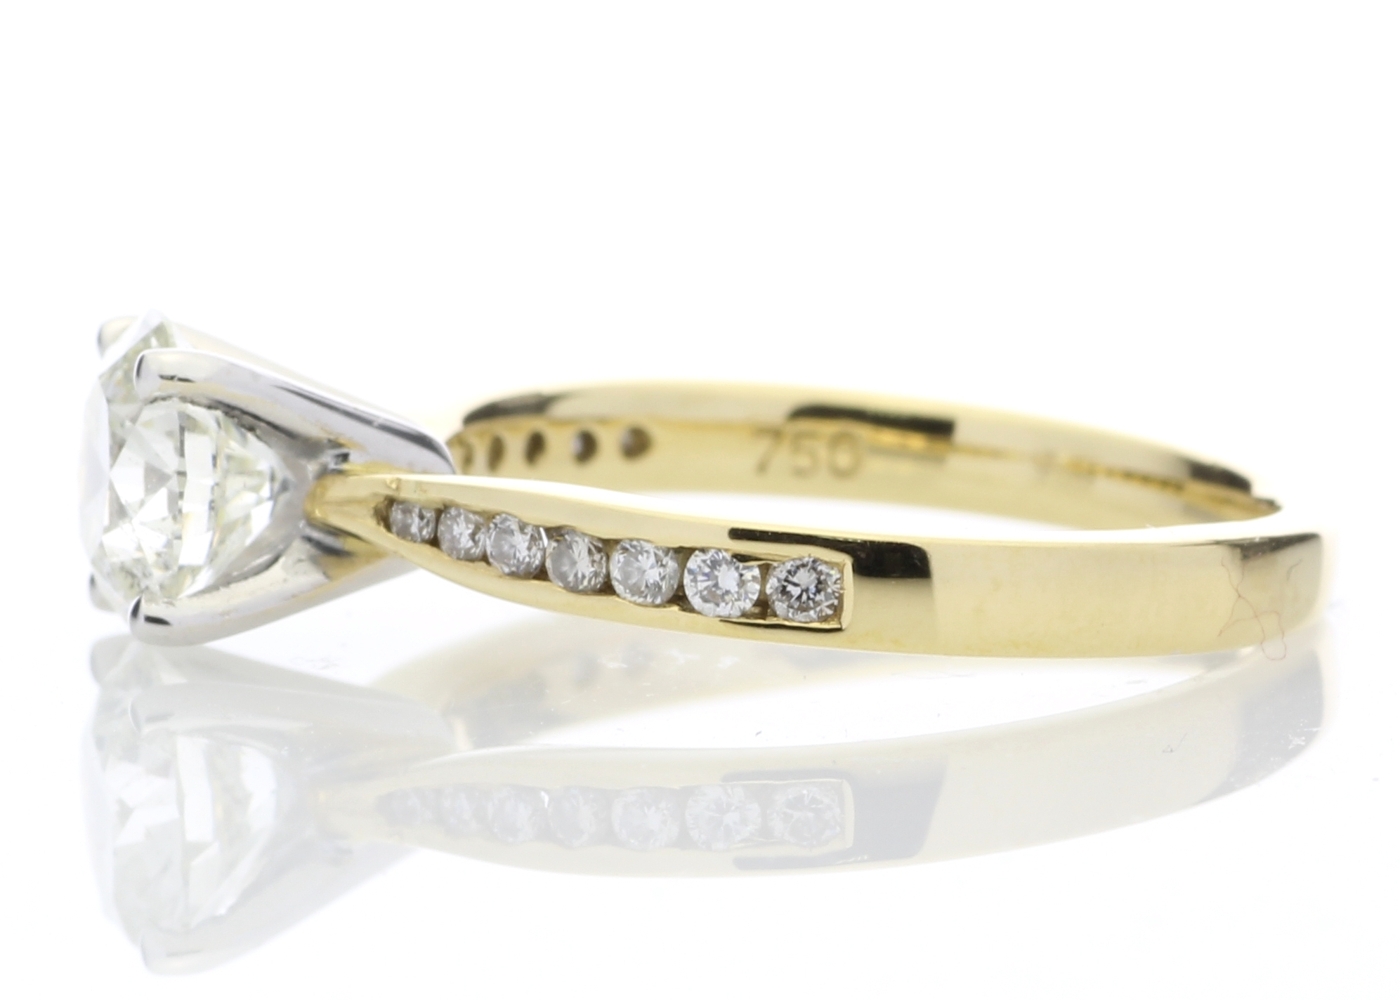 18ct Yellow Gold Single Stone Diamond Ring With Stone Set Shoulders (1.11) 1.28 - Image 3 of 5